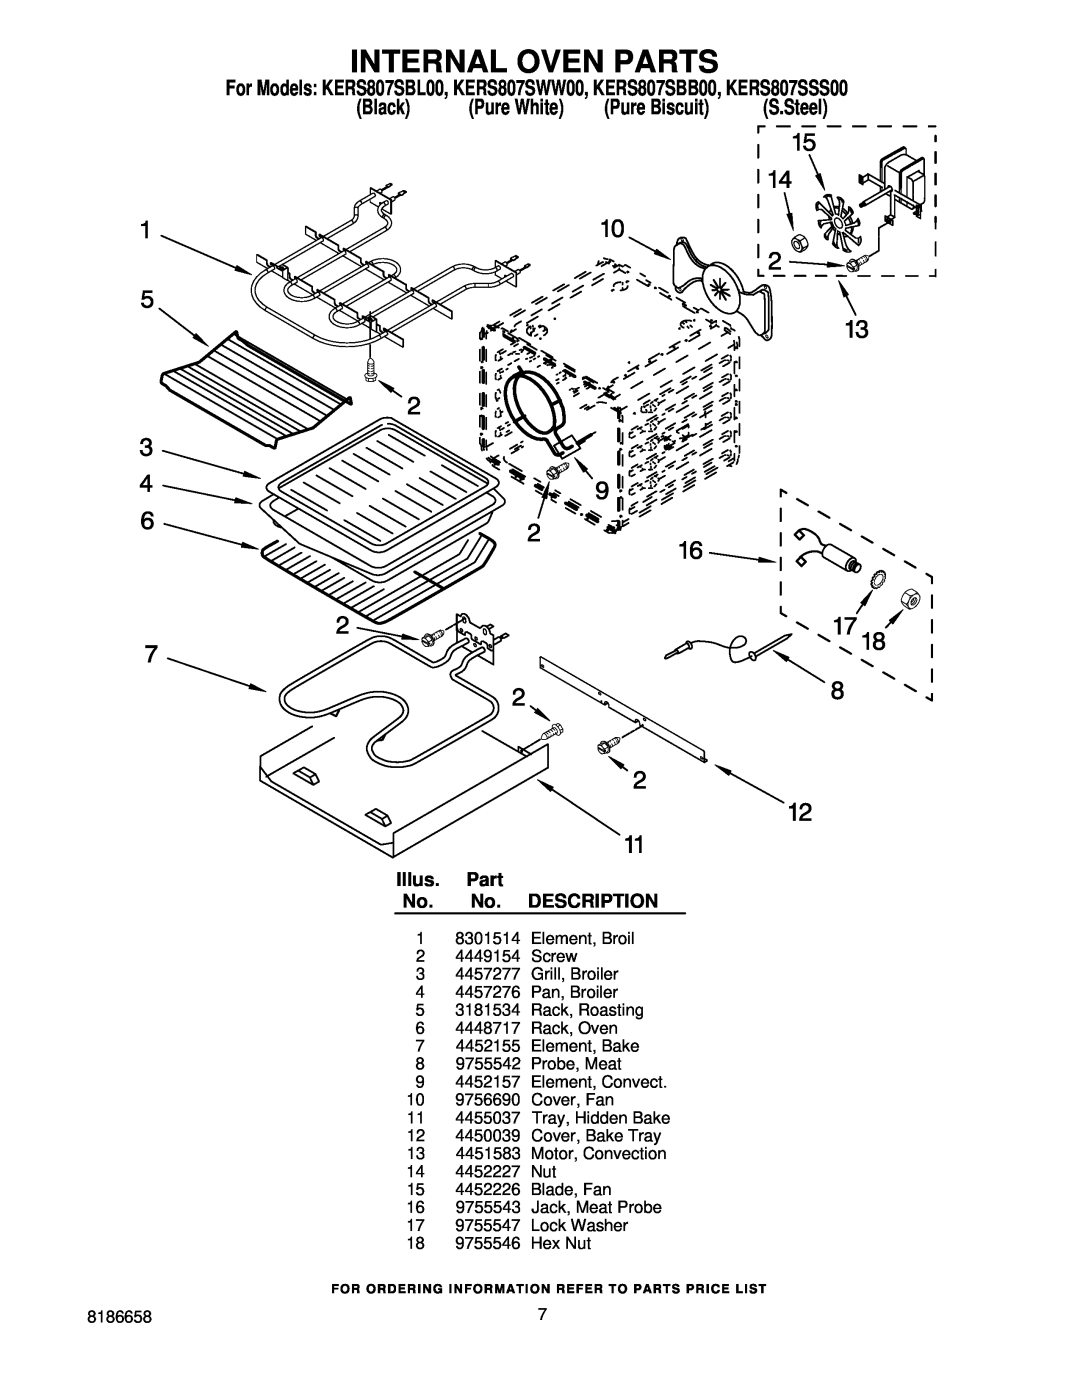 KitchenAid manual Internal Oven Parts, For Models KERS807SBL00, KERS807SWW00, KERS807SBB00, KERS807SSS00 